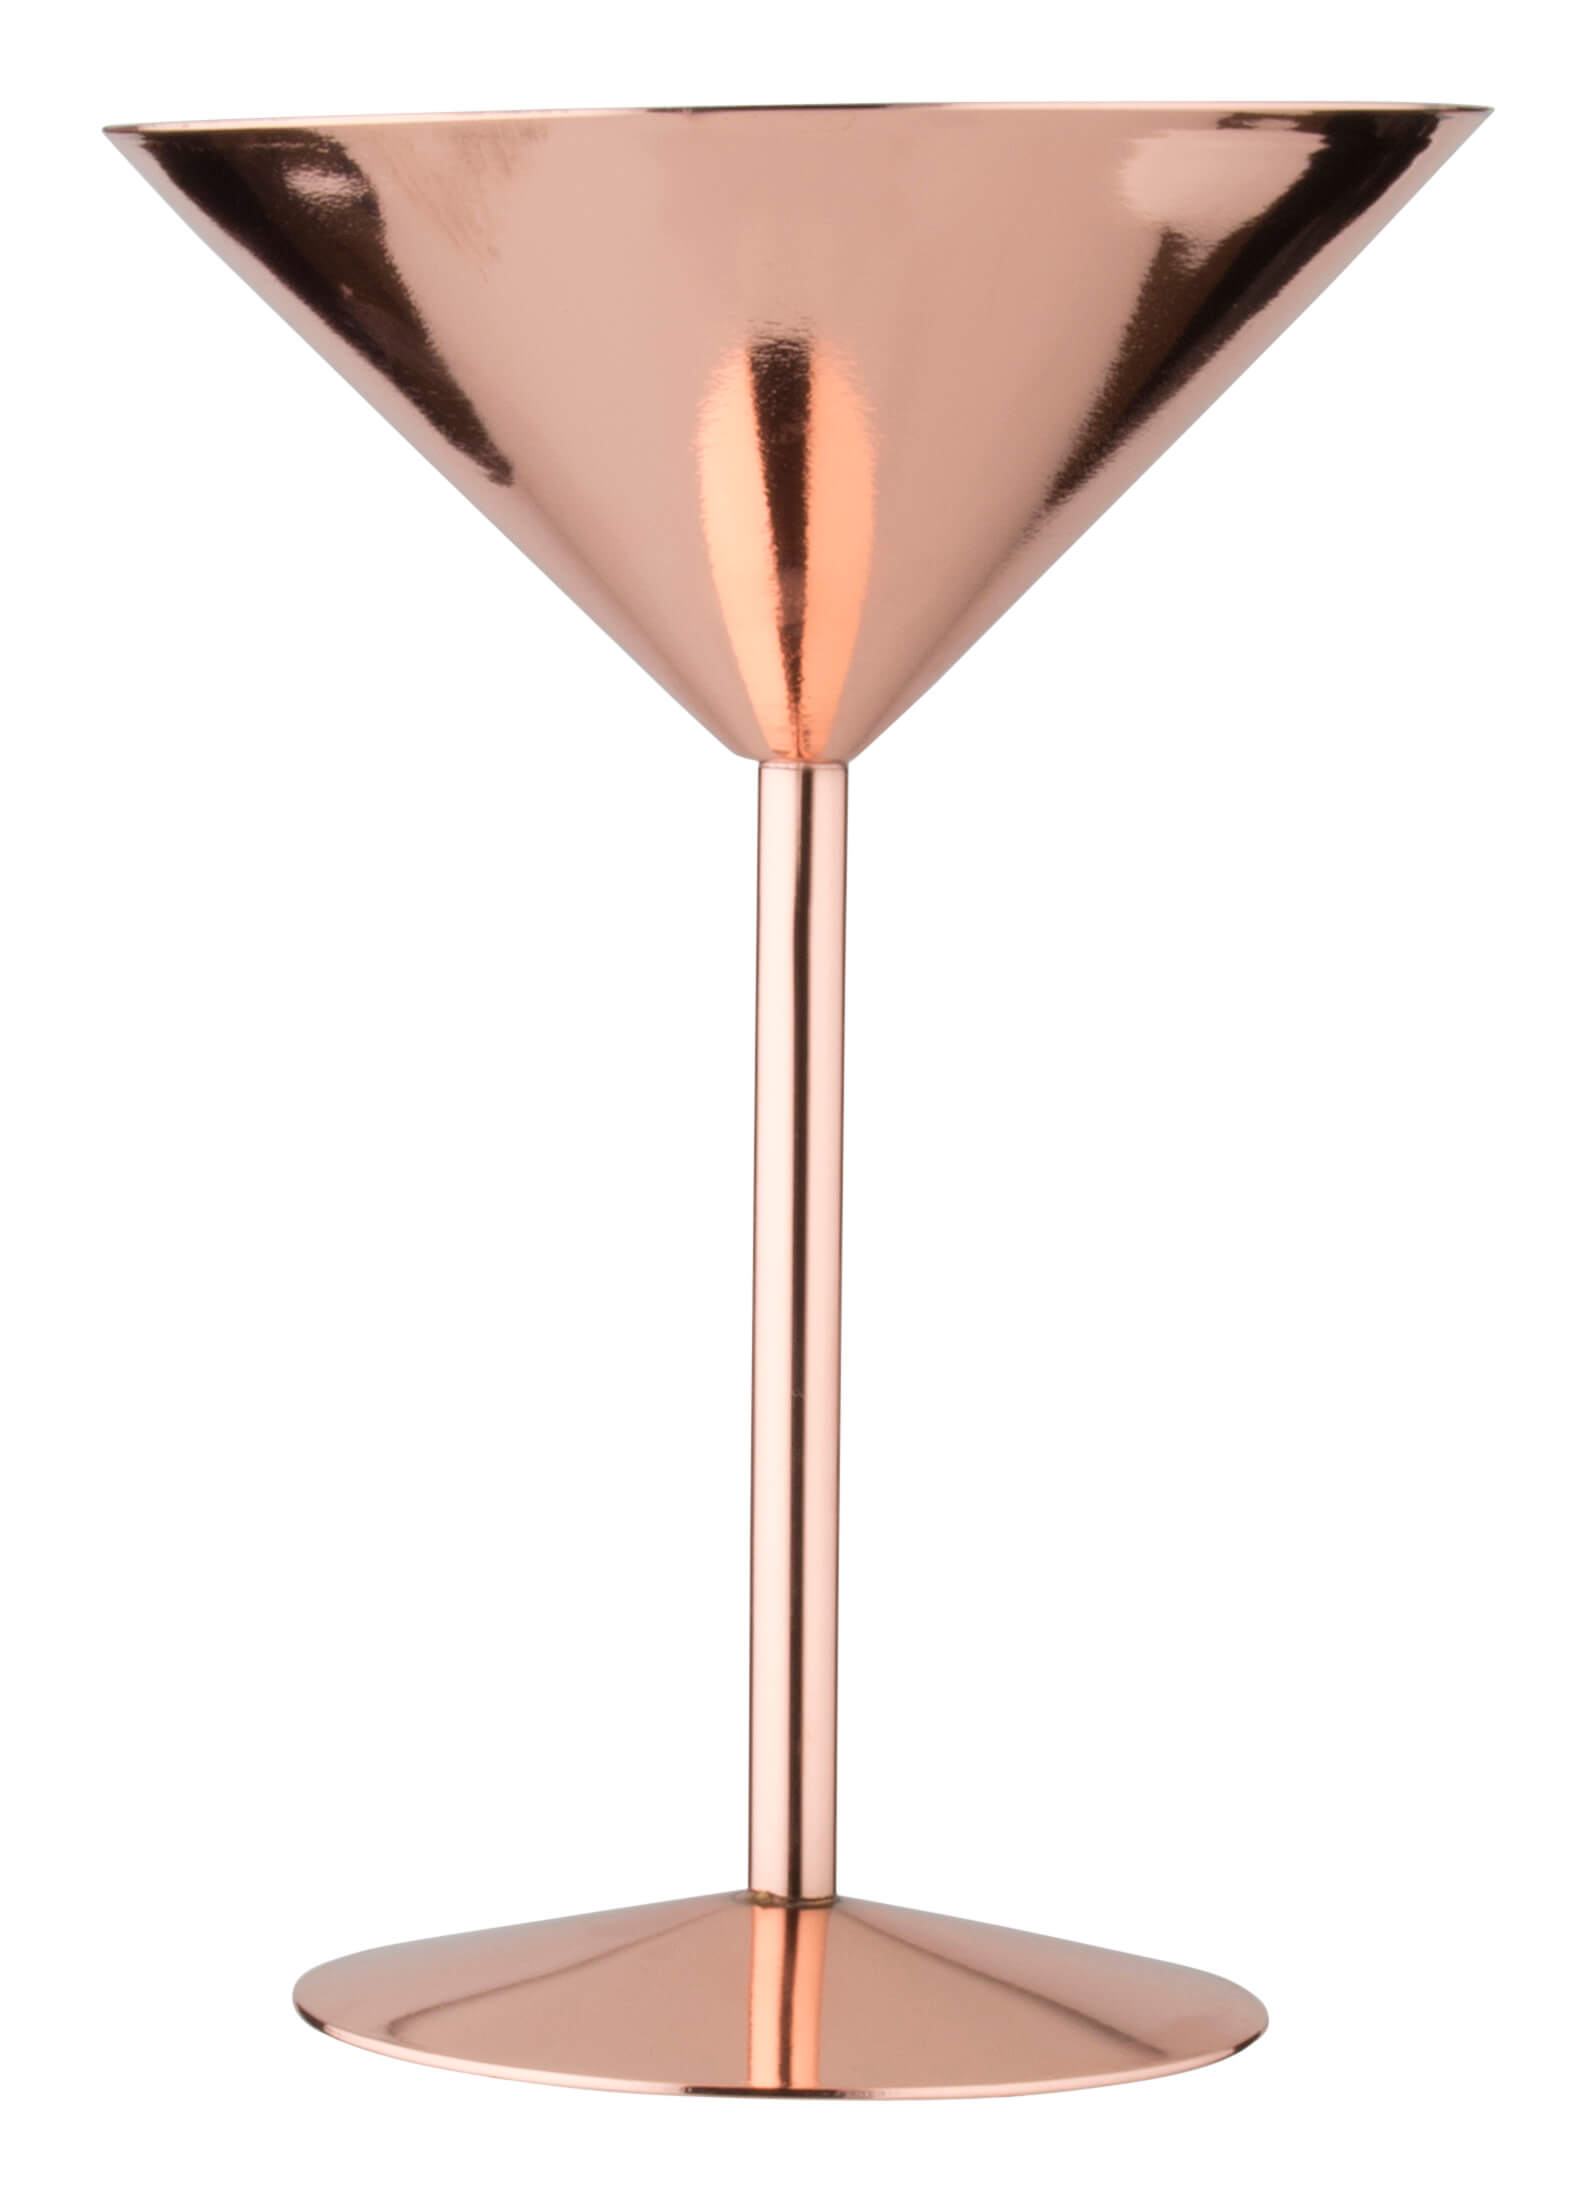 Martini glass, copper plated stainless steel - 240ml